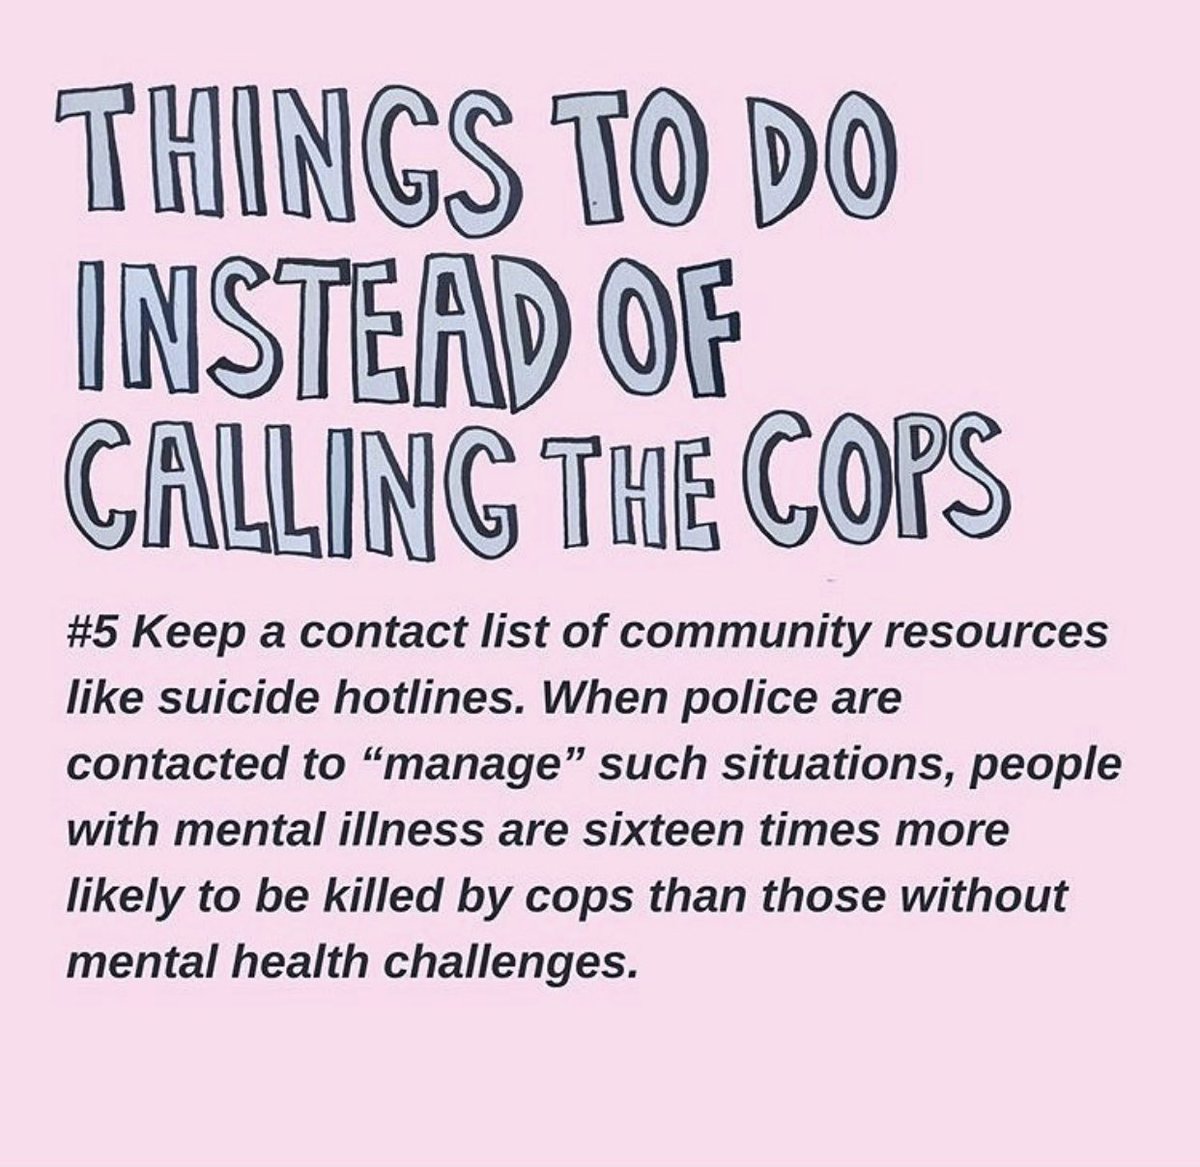 inserting the police in a situation is clearly putting lives at risk. here are alternatives via @ tapicoa_starch on IG